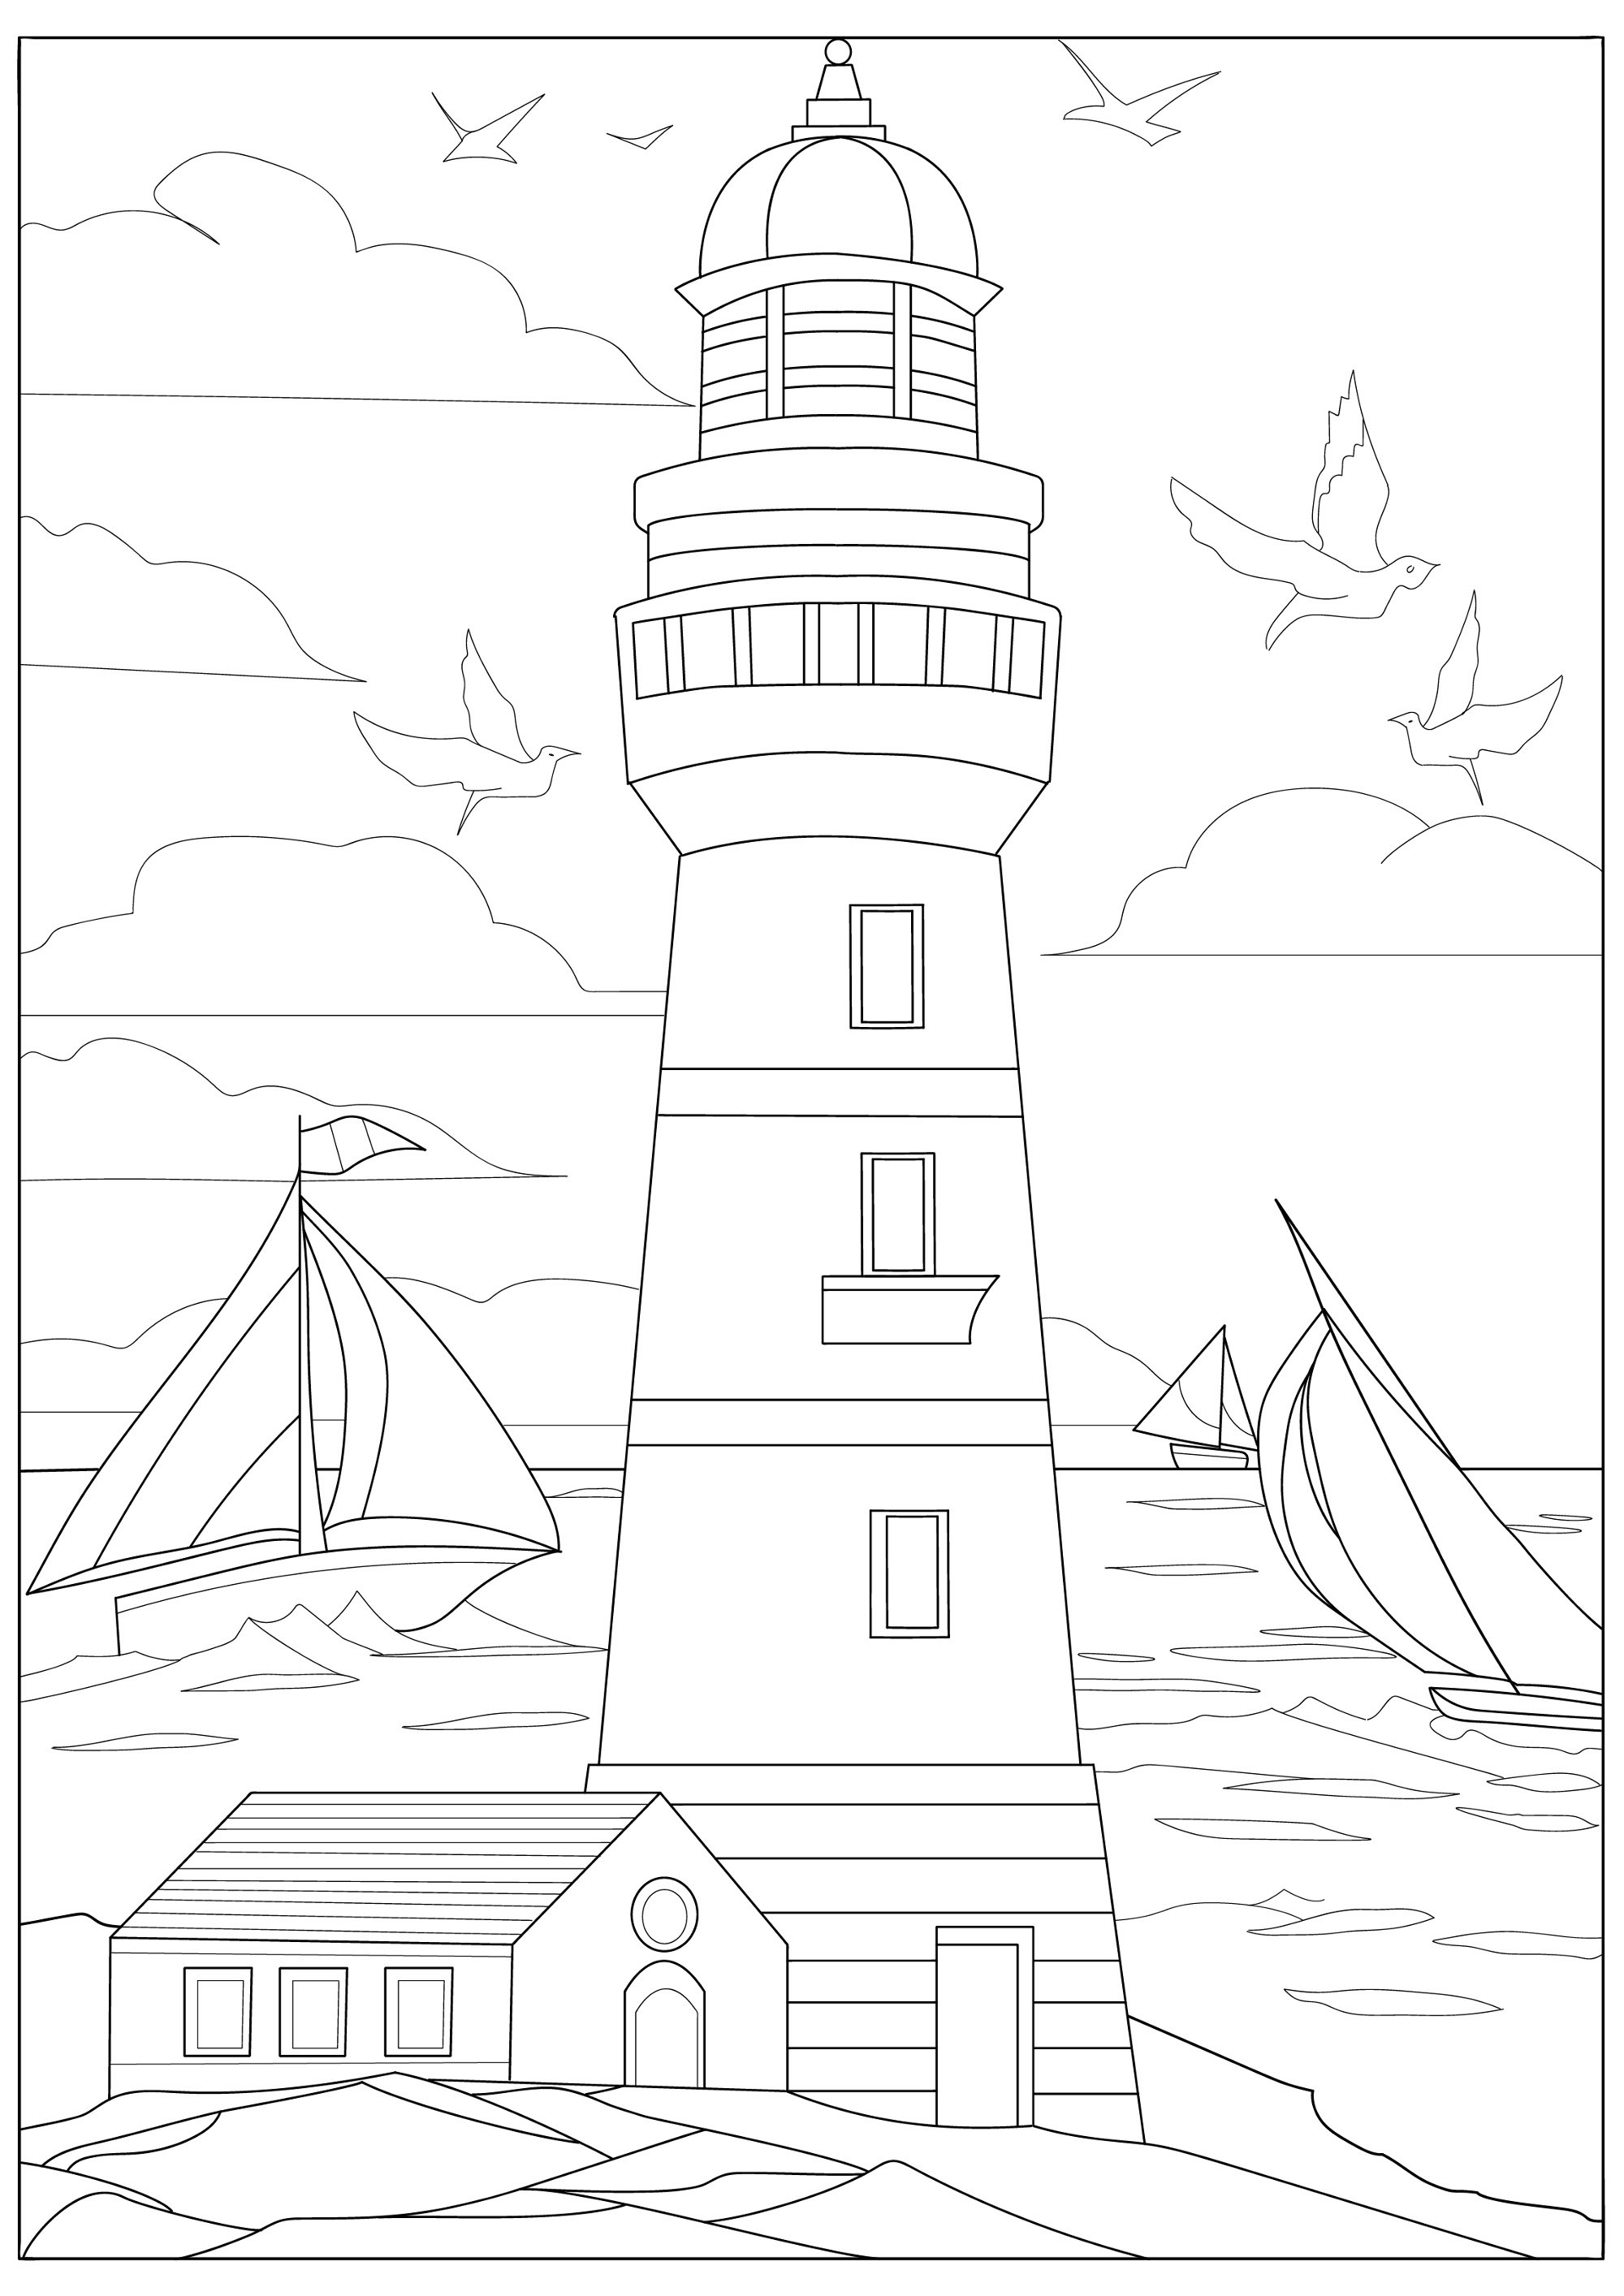 Nice Breton lighthouse to color, with a calm sea and some boats in the background